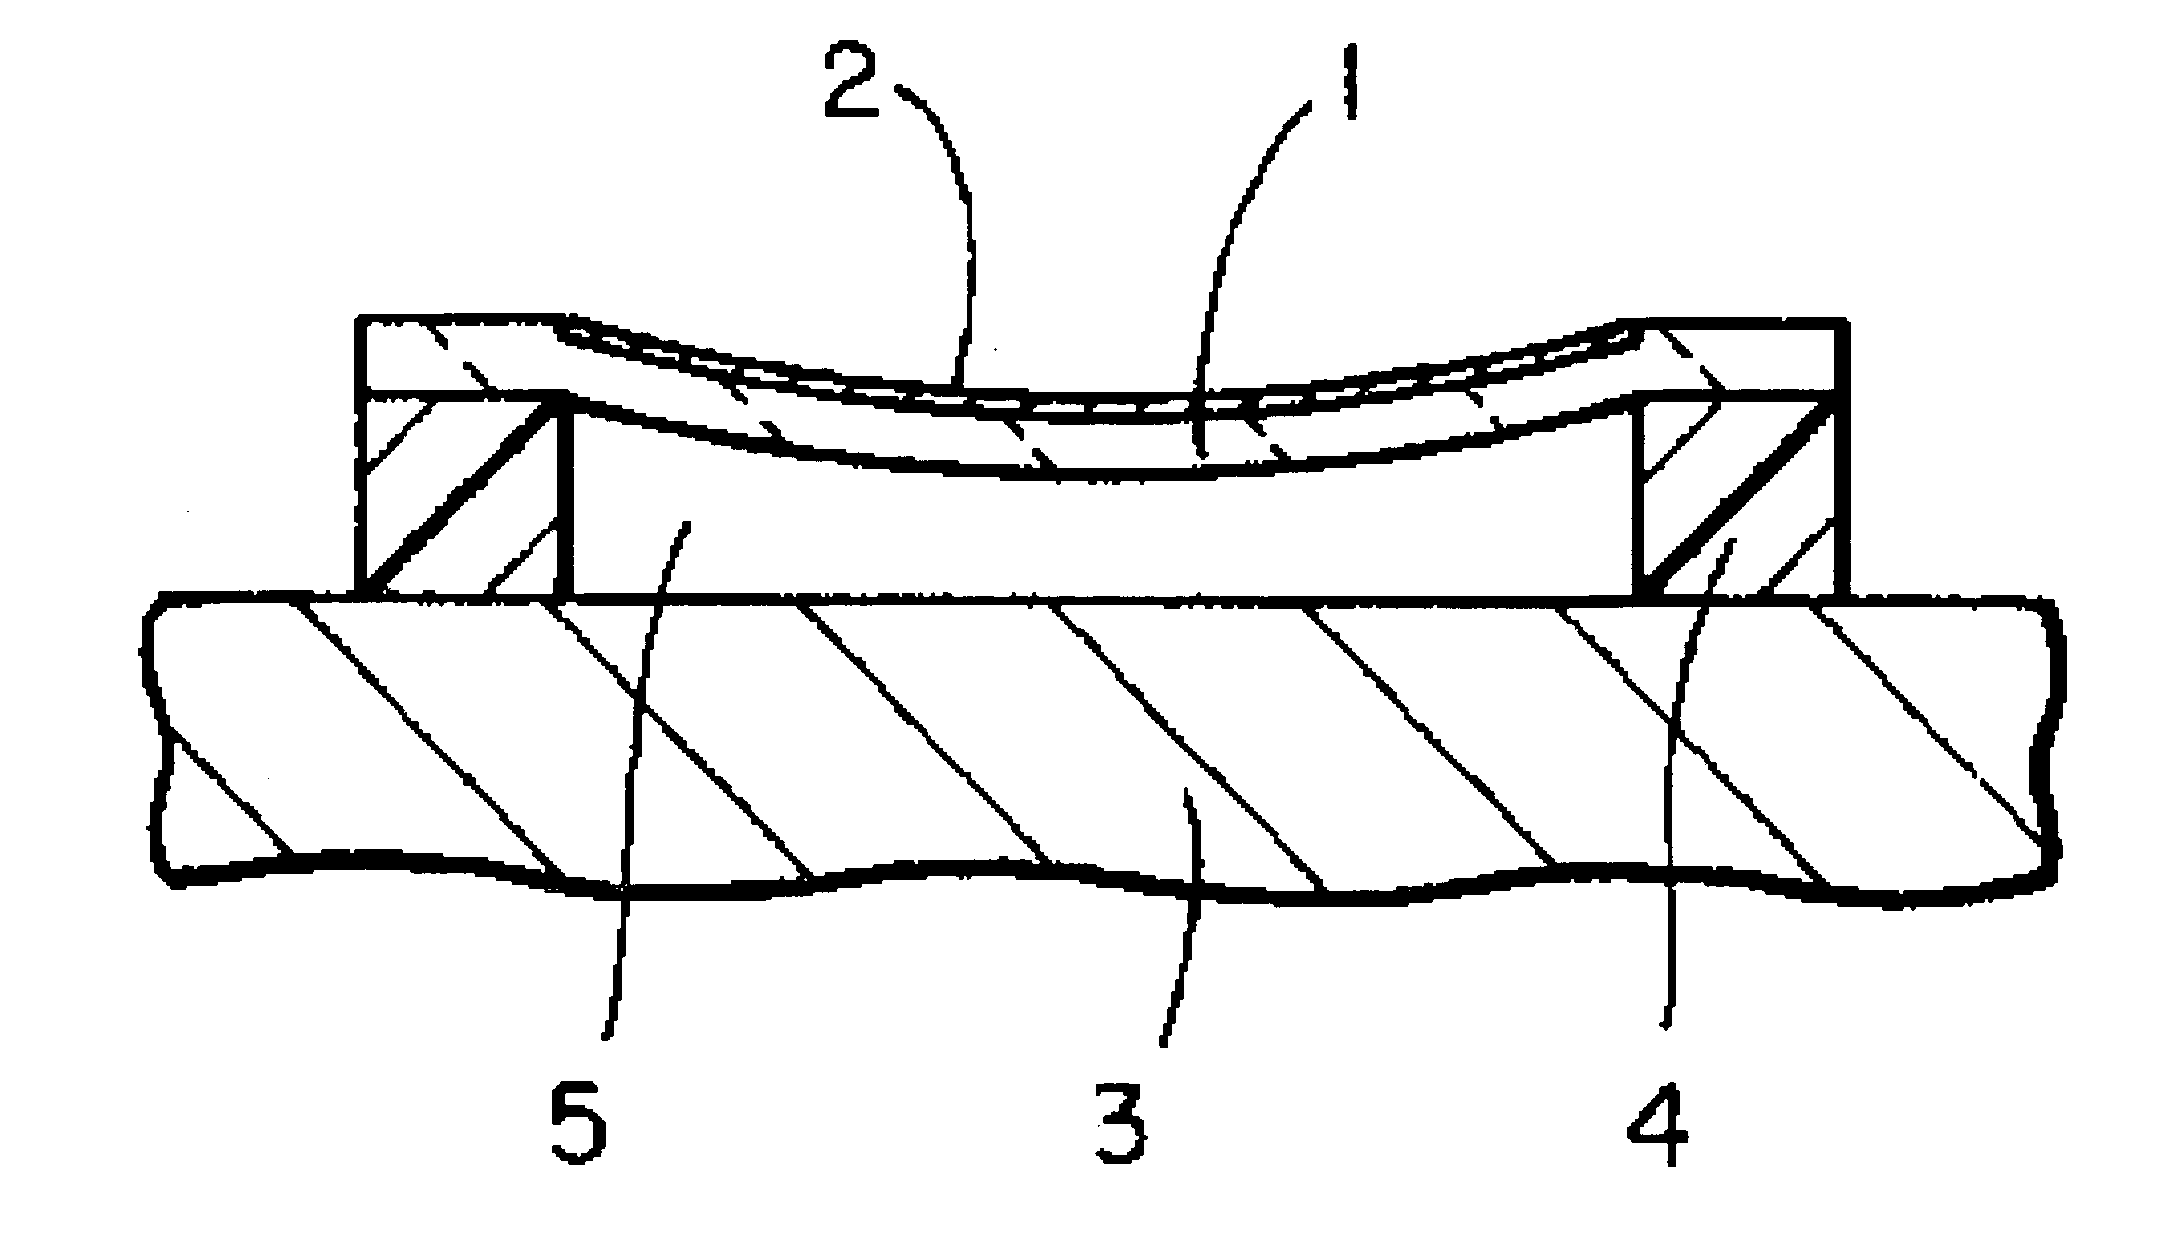 Micromachined acoustic transducer and method of operating the same